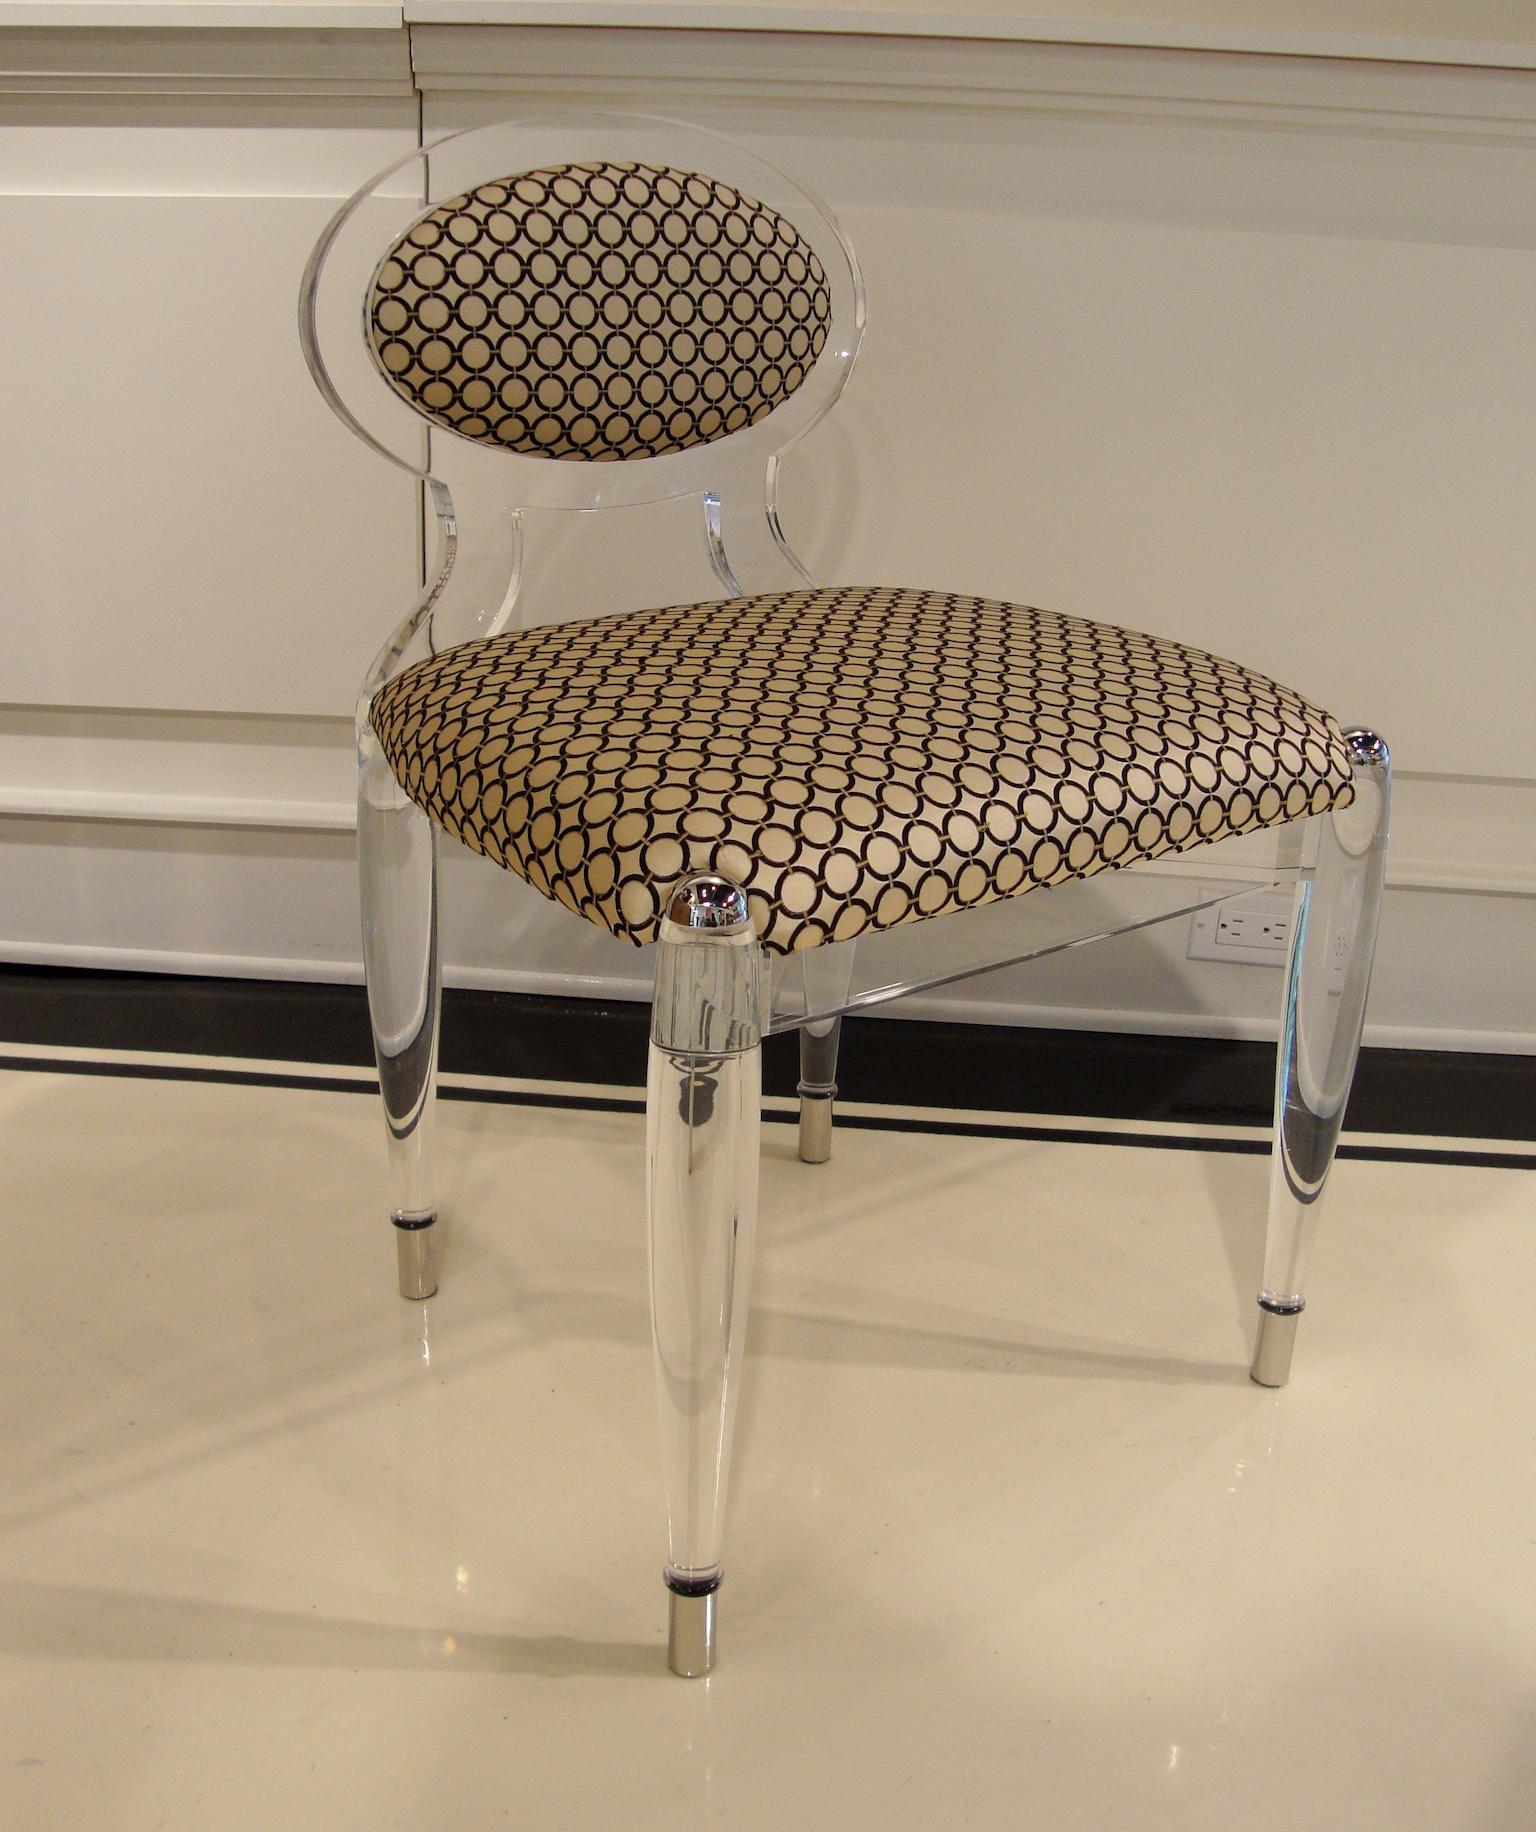 American Classic Modern Acrylic Chair with Polished Stainless Steel Sabots in Stock